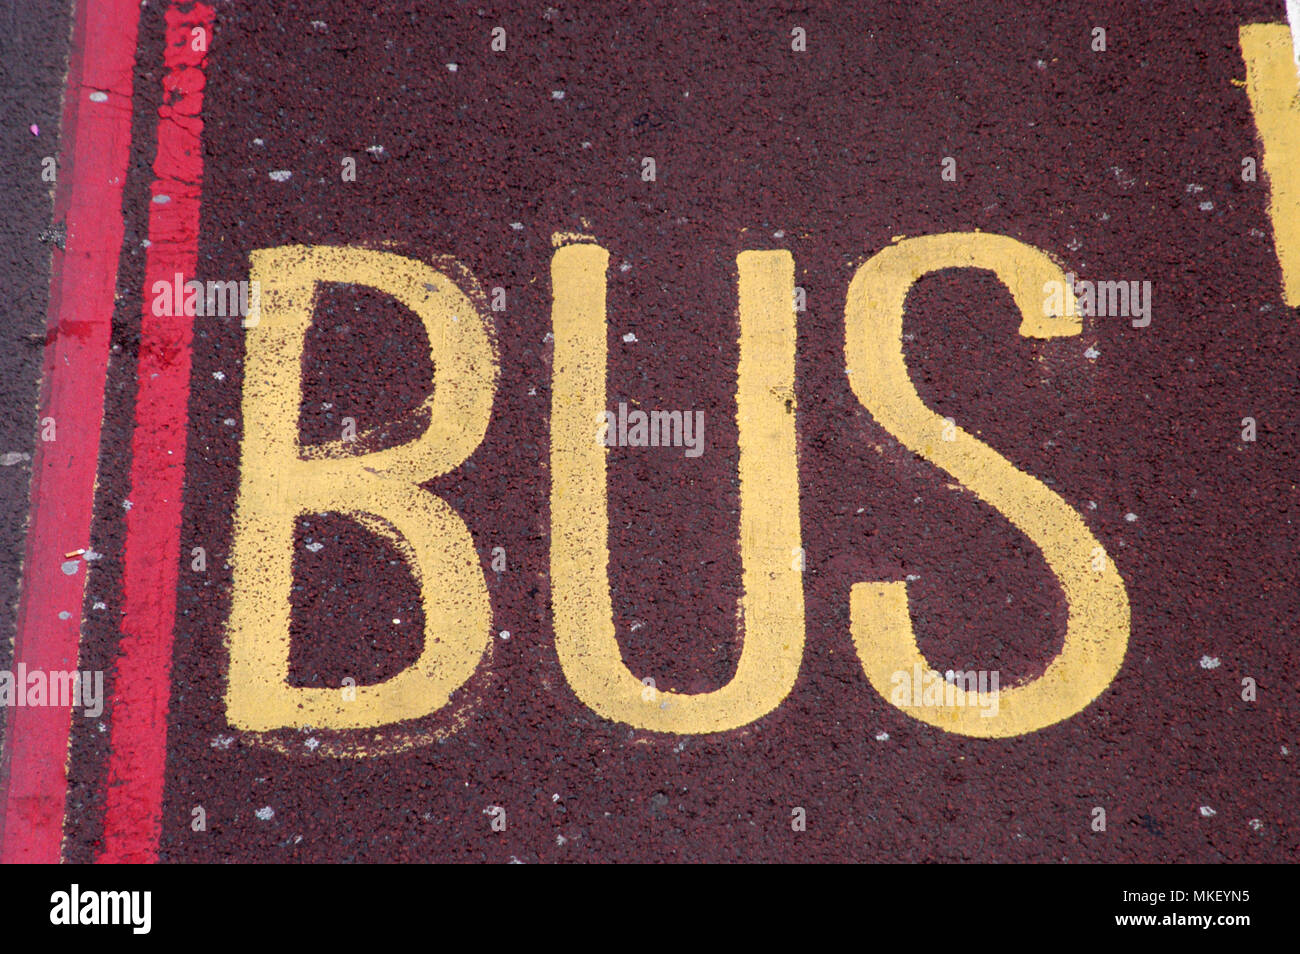 city centre traffic control zones bus lane only with red lines on red tarmac Stock Photo